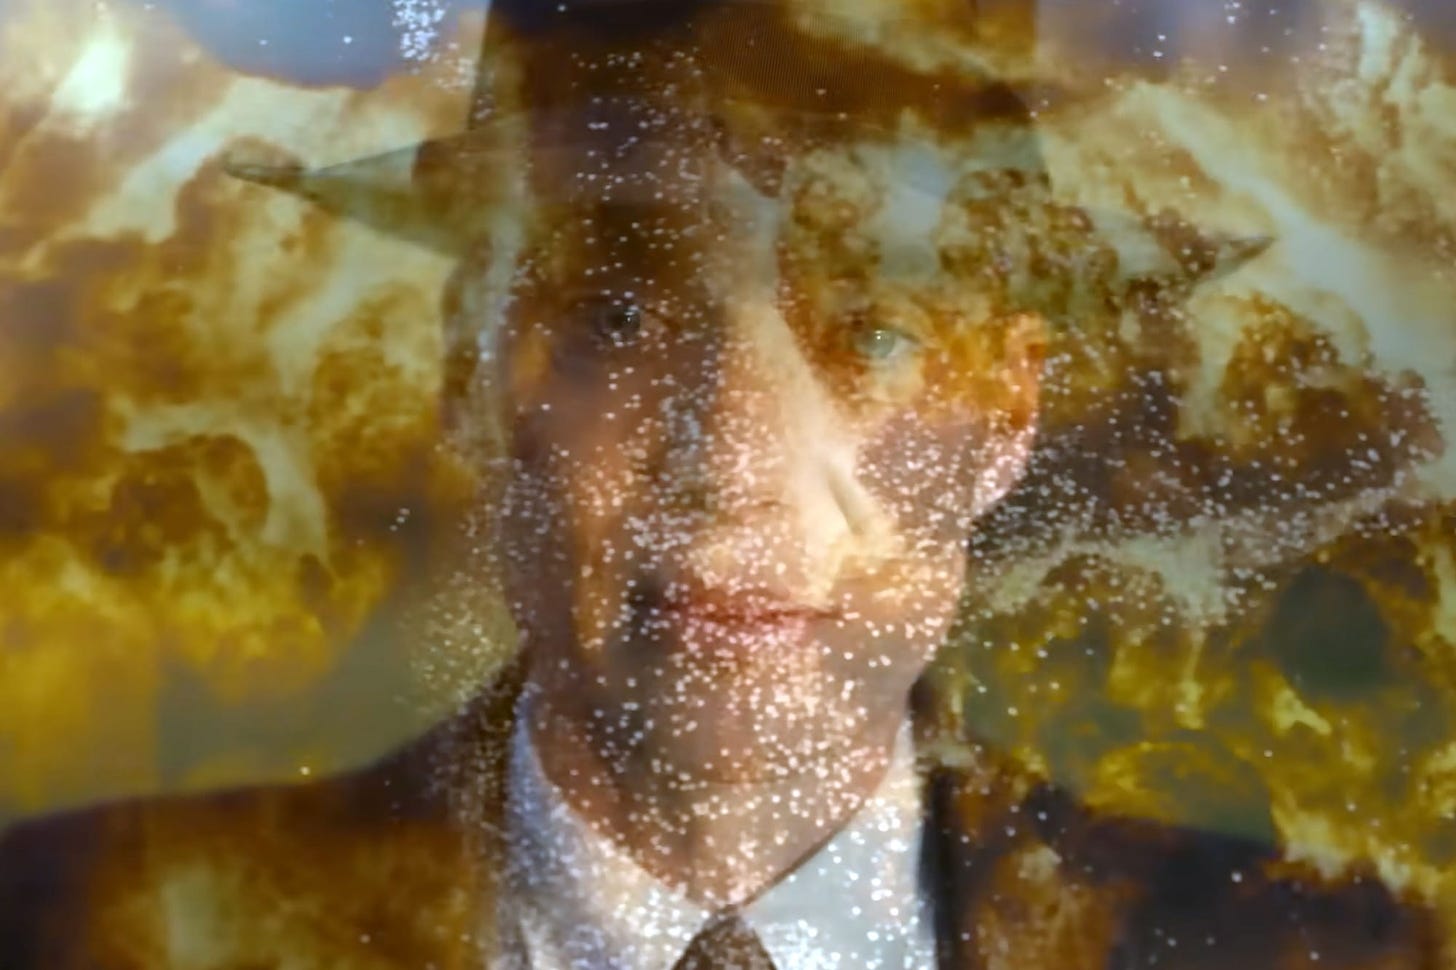 Portrait shot of Cillian Murphy as J. Robt. Oppenheimer in fedora and suit, melded with the image of a nuclear explosion in molten golds and browns